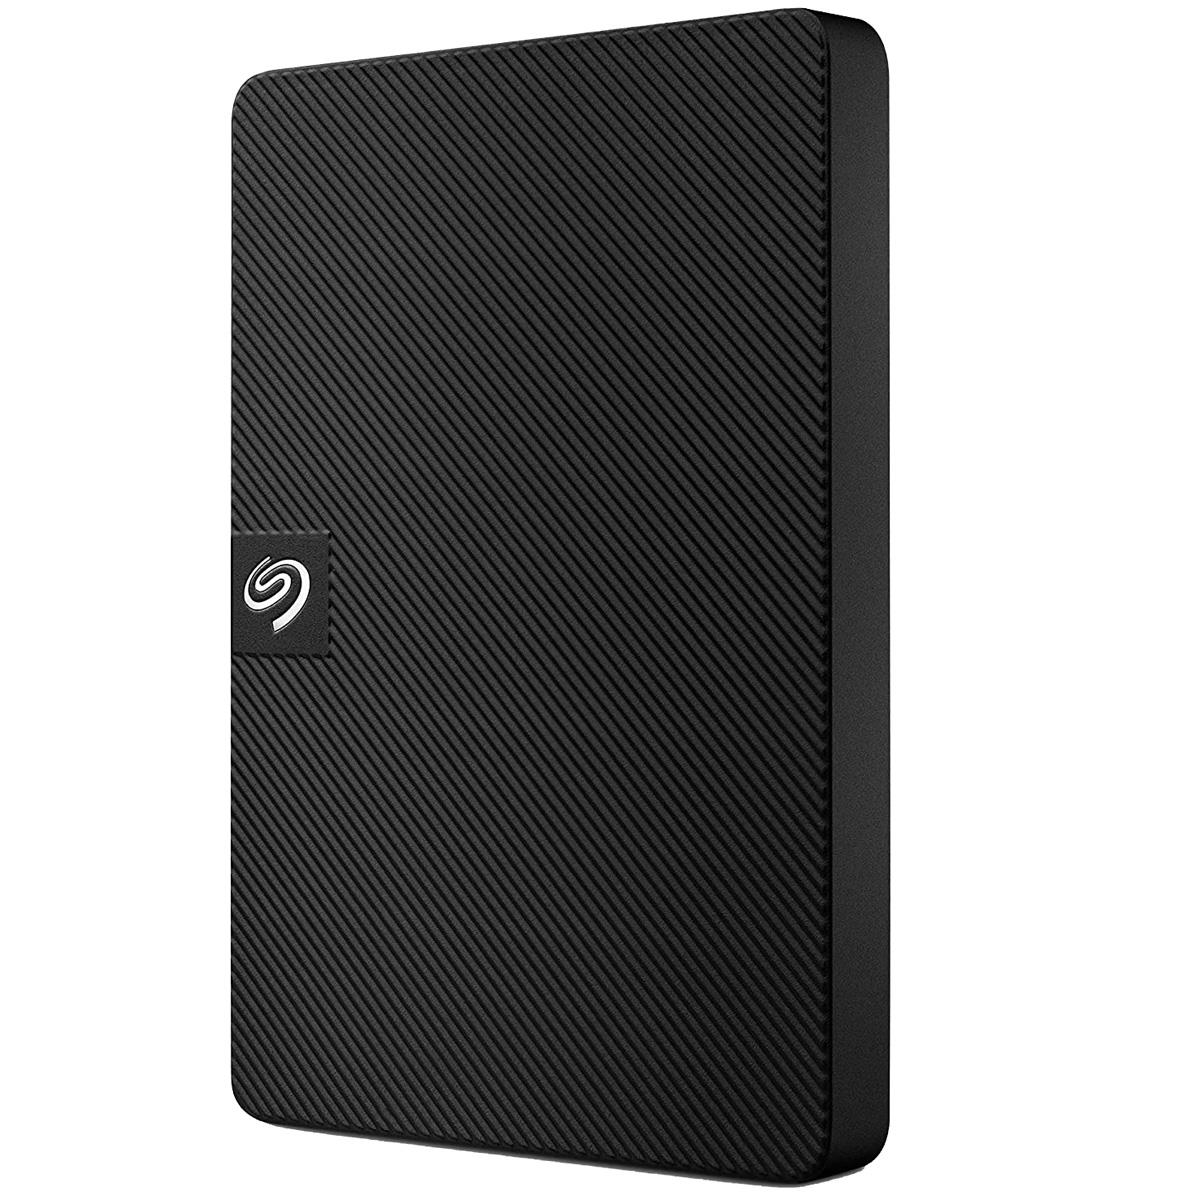 Image of Seagate Expansion 1TB USB 3.0 Portable External Hard Drive